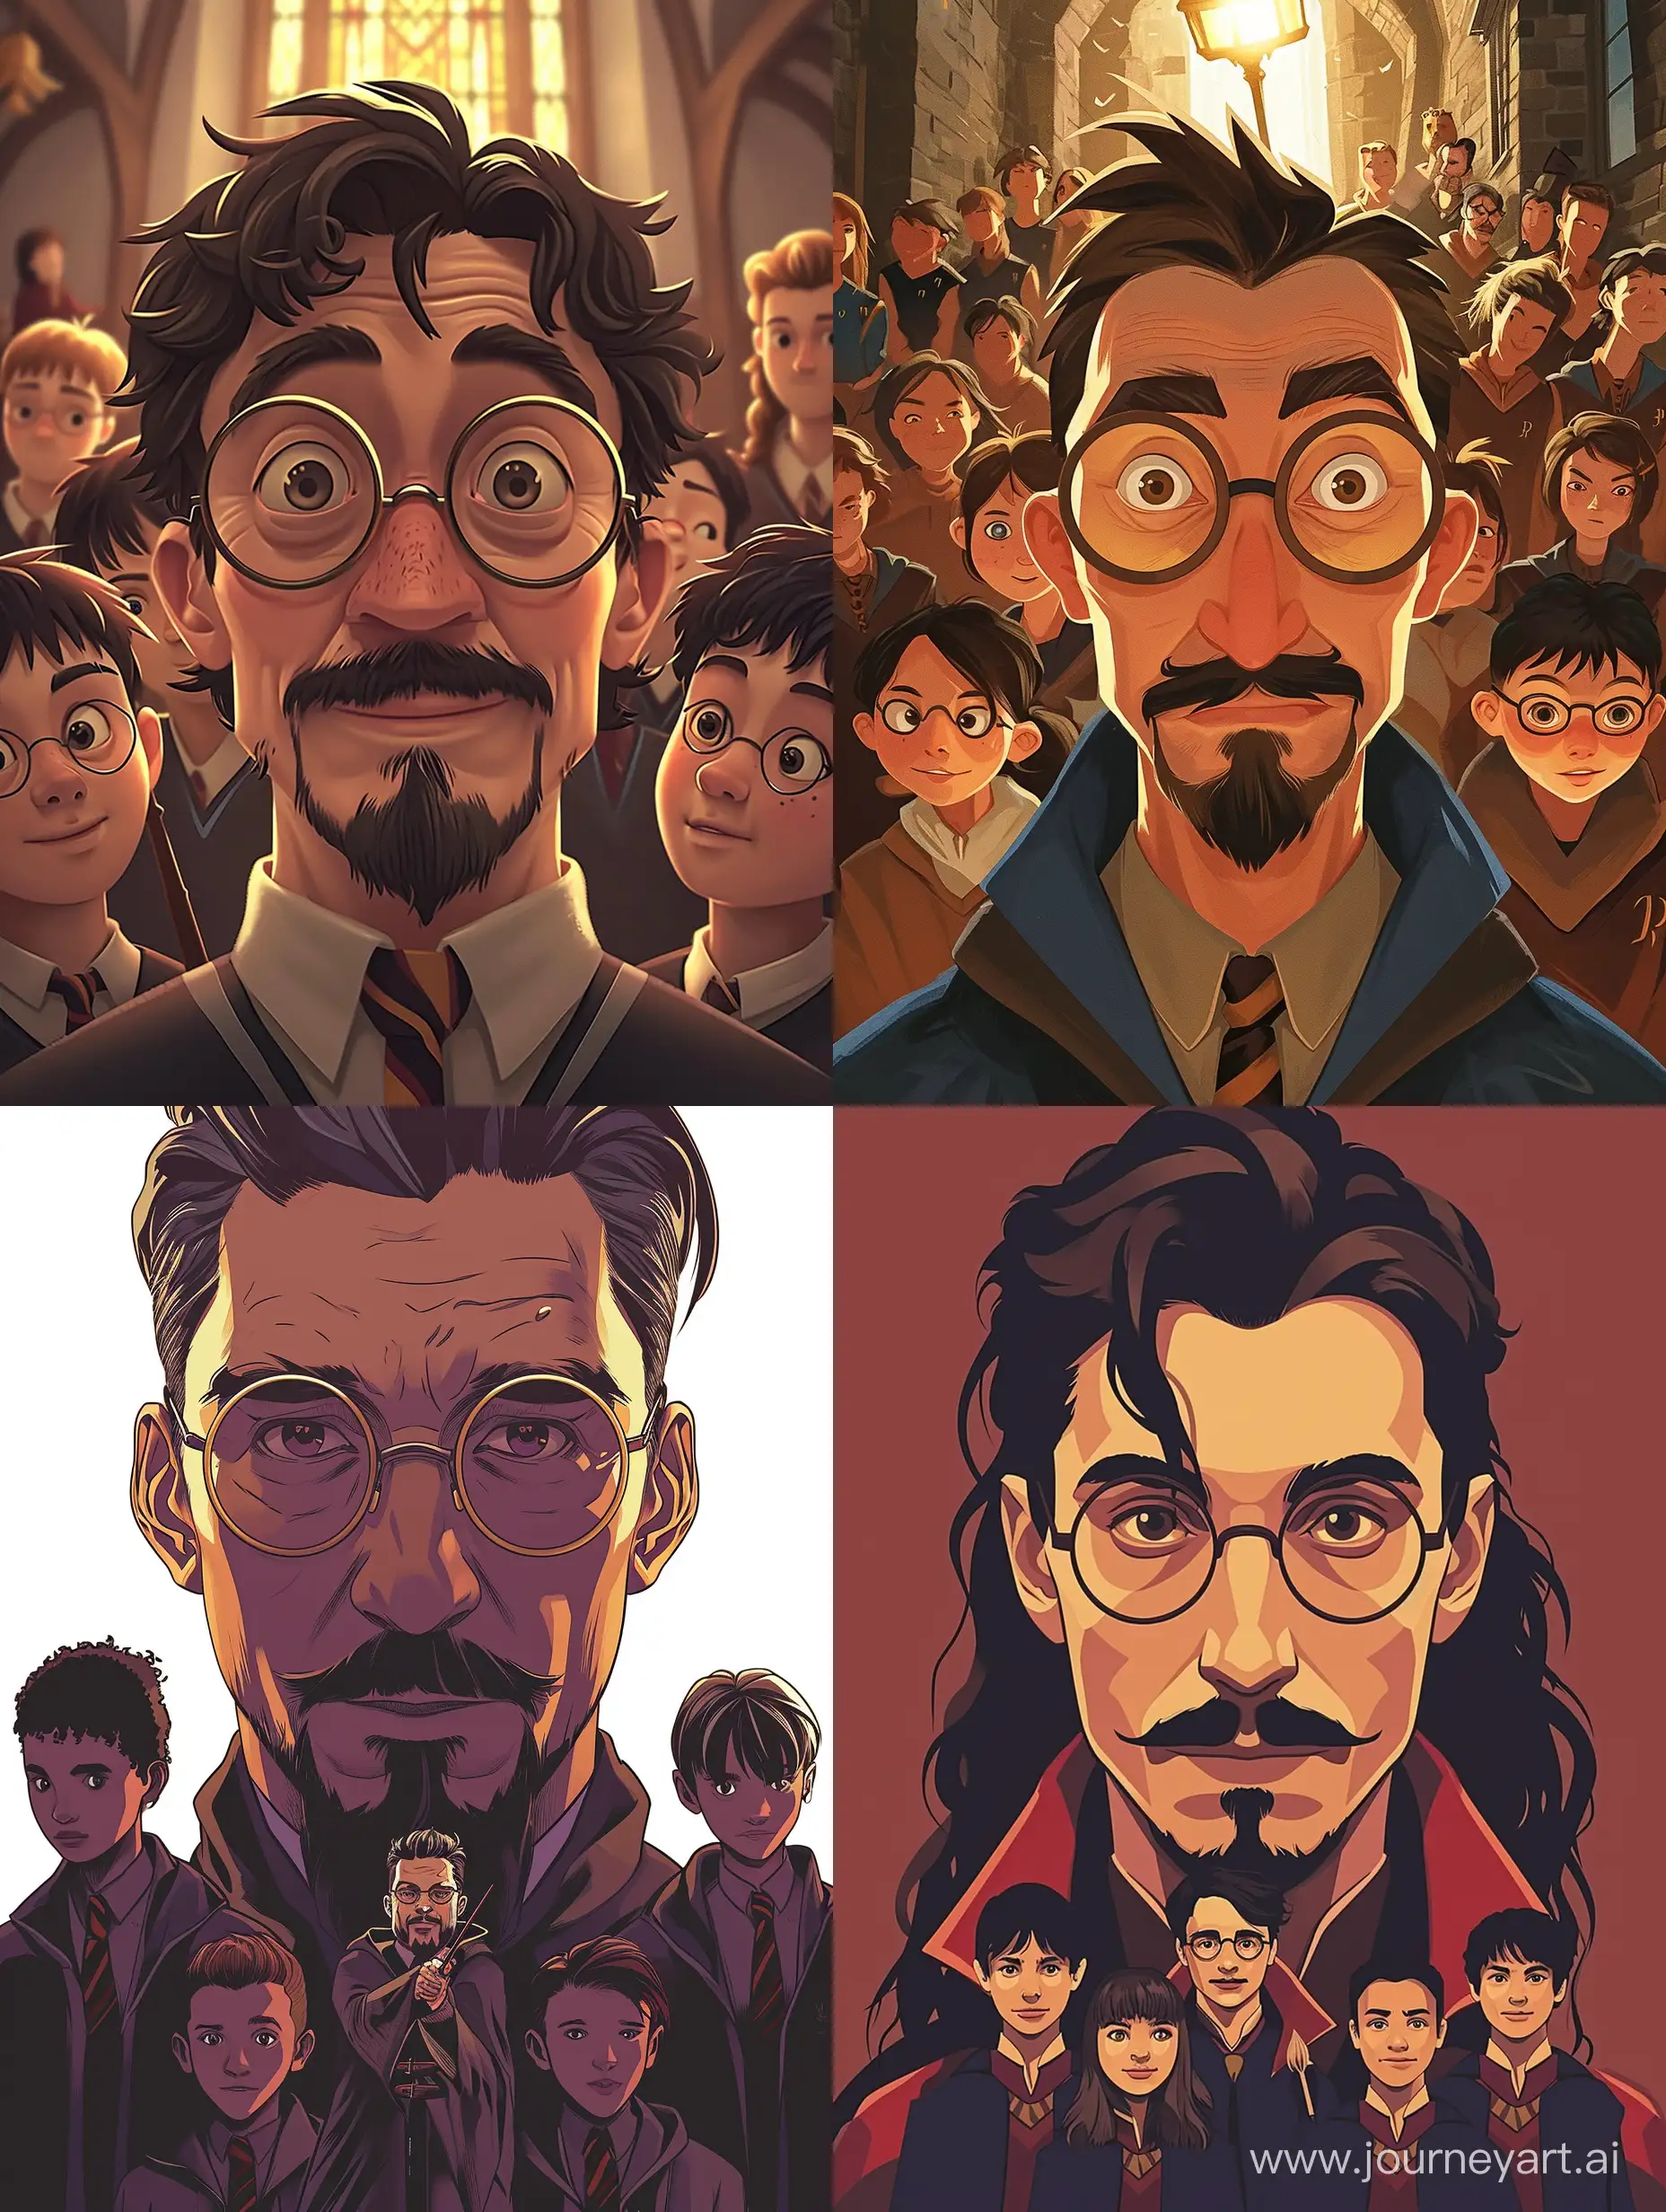 a teacher wearing round glasses and a goatee, some students standing front , Hogwarts, high quality, high detail, cartoon art